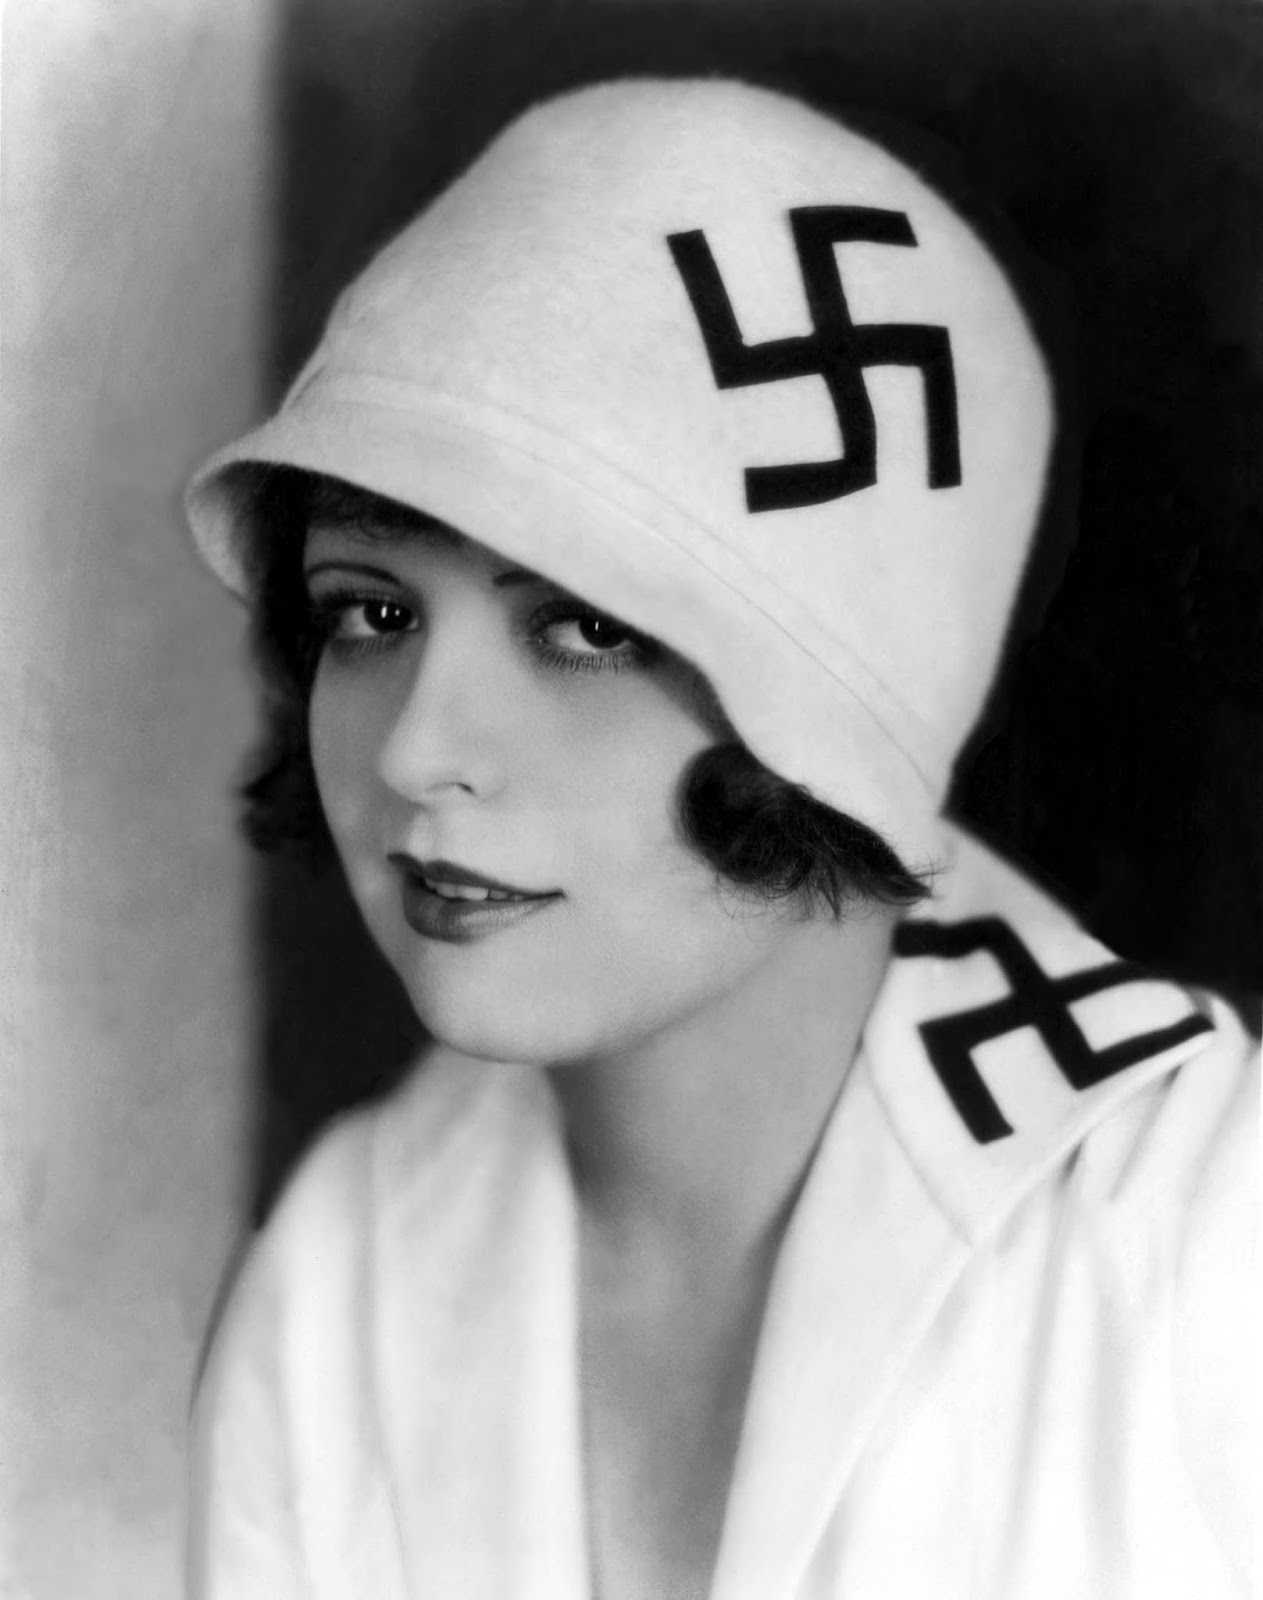 The Untold Story of Clara Bow's Fashionable Swastika Hat Before Its Infamy